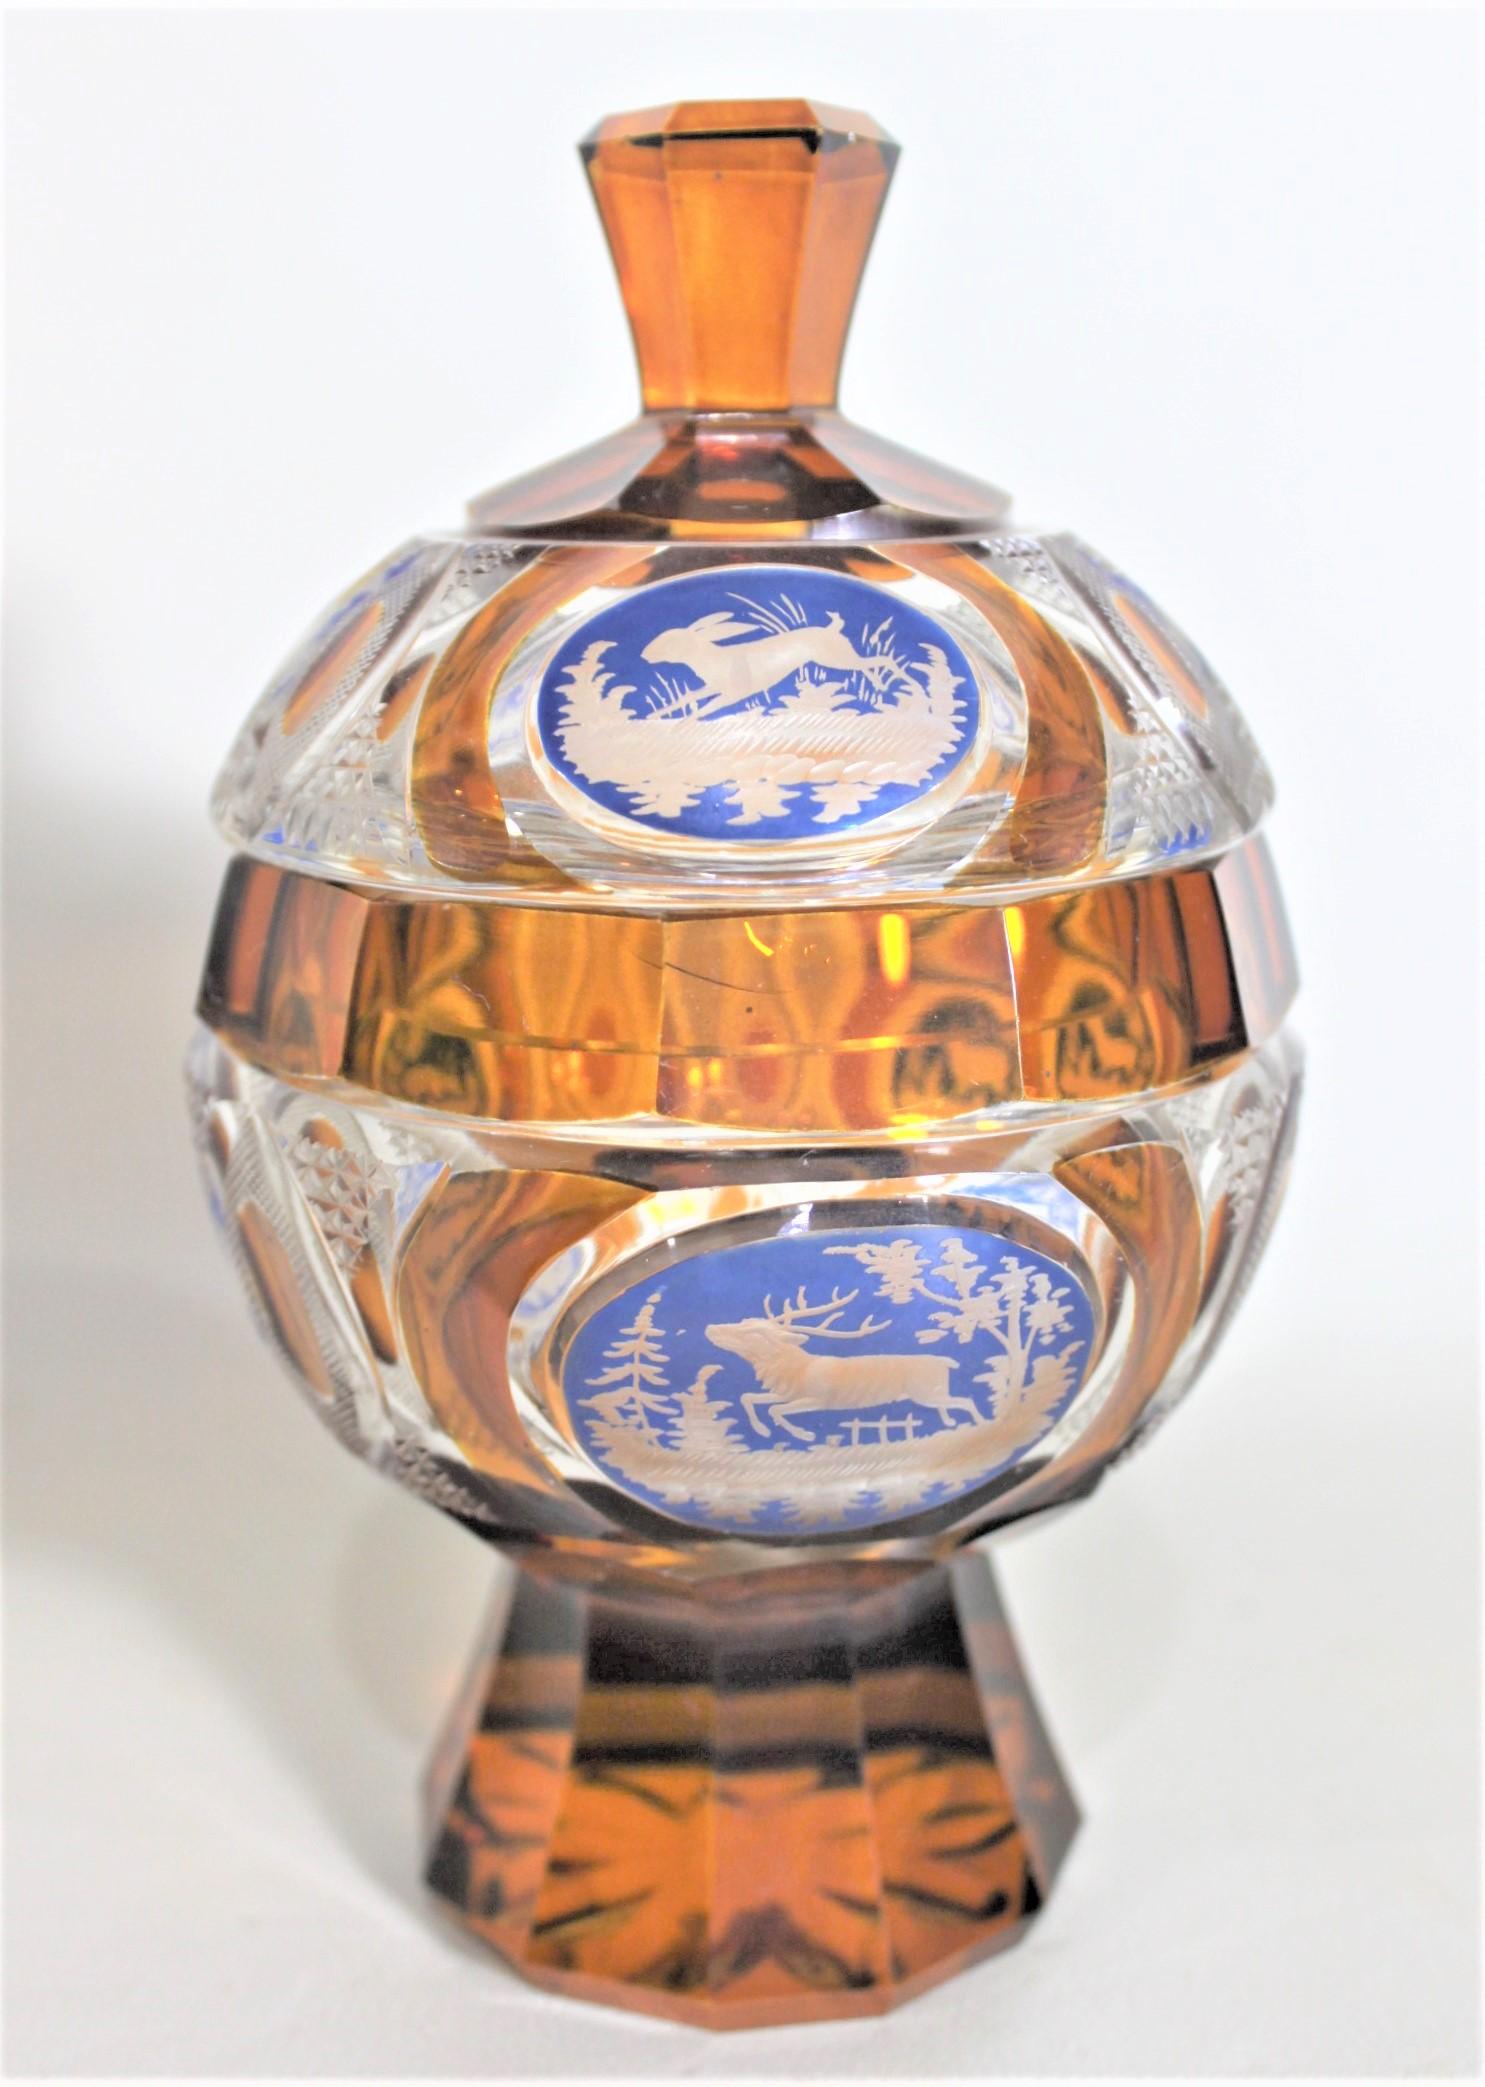 This cut crystal covered goblet styled compote is unsigned, but presumed to have been made in the region of Bohemia, likely the Czech Republic in approximately 1920. The compote features the use of amber and blue glass which has been very nicely